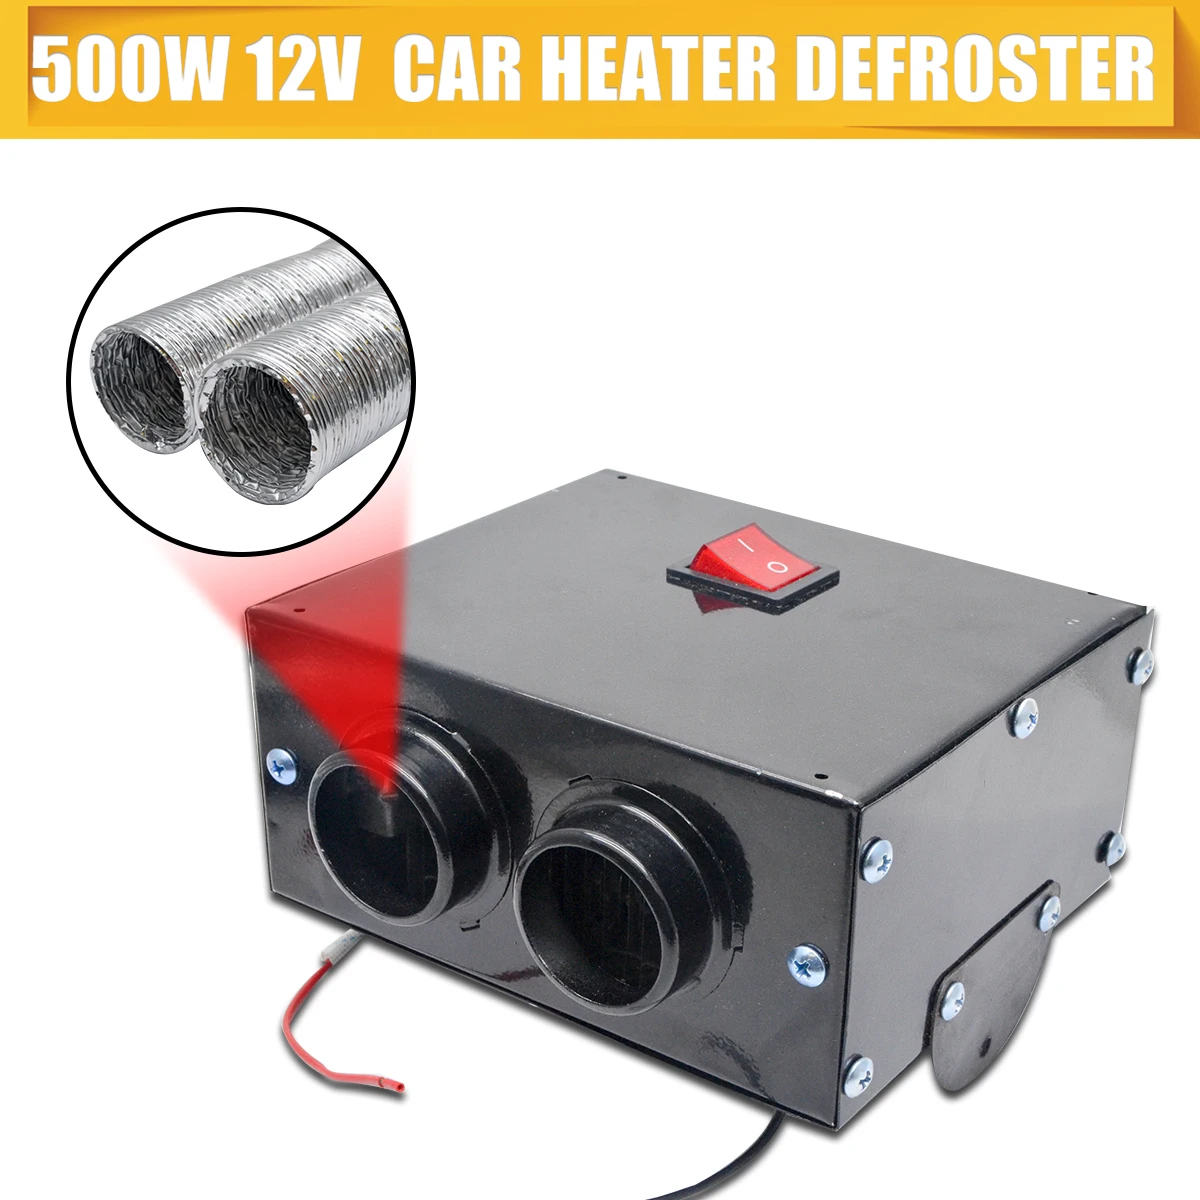 Universal Demister 12V Car Heater 2 In 1 Defroster Windscreen 500W Warmer Fan Heating Air Conditioner For Car Truck